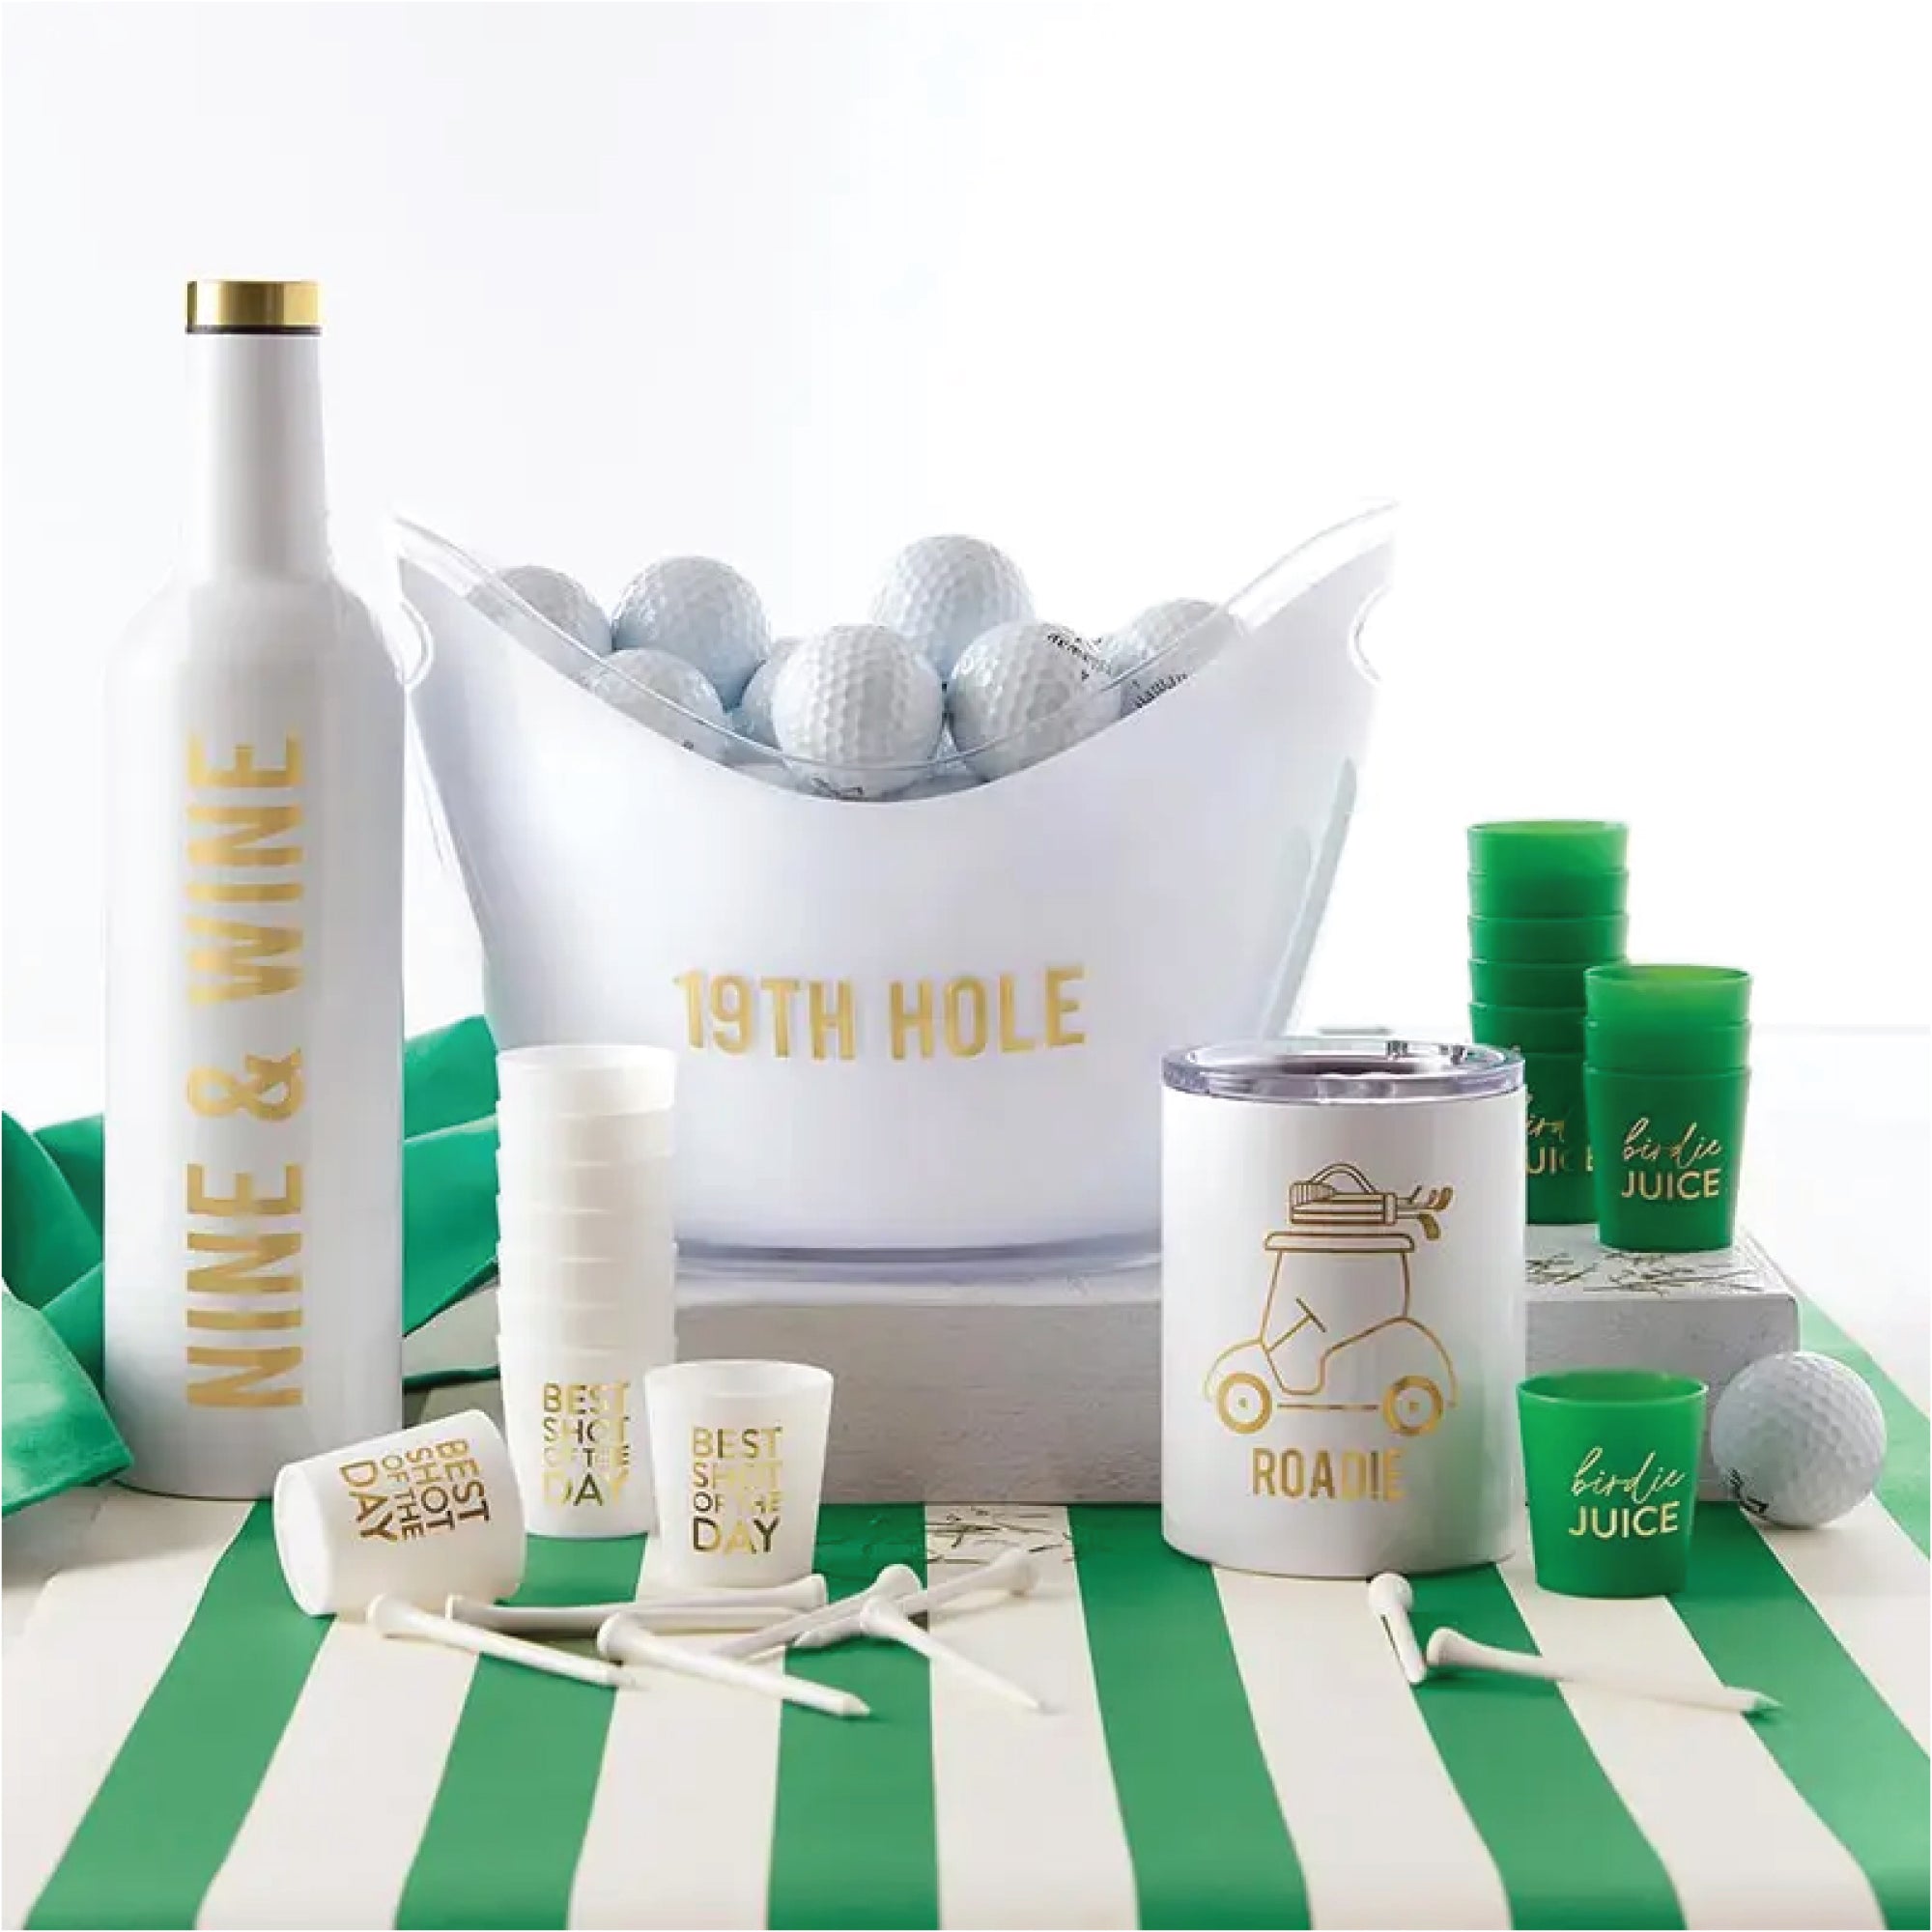 19th Hole Acrylic Beverage & Ice Bucket | The Party Darling